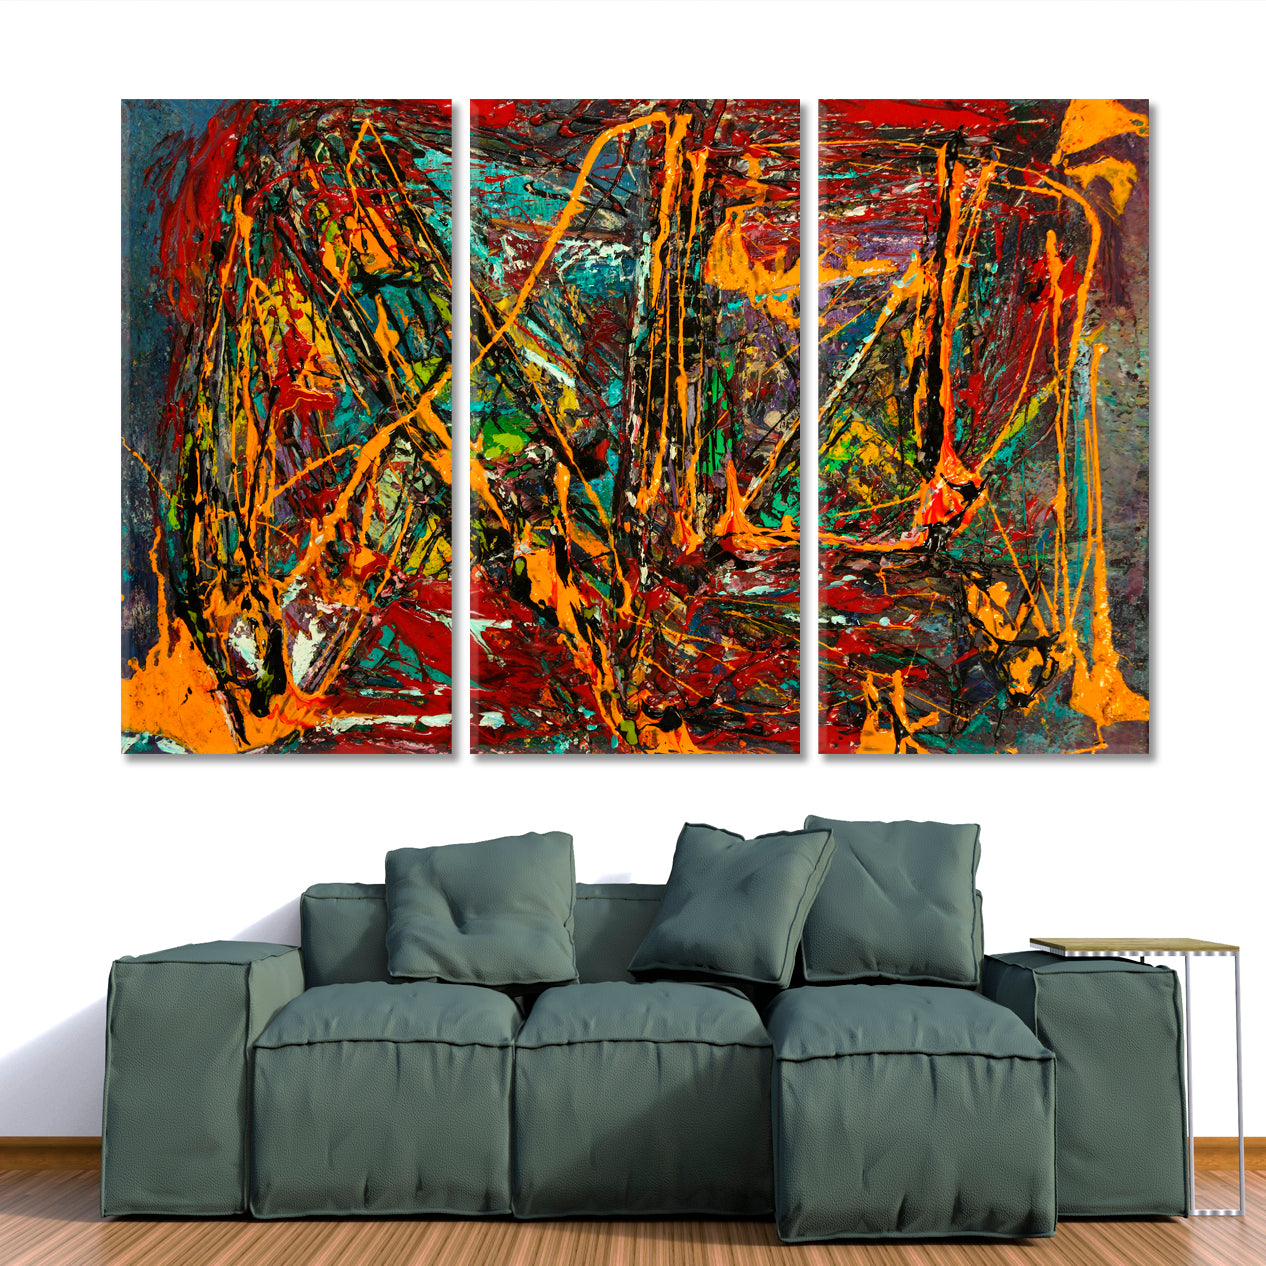 Beautiful Abstract Fire Flame Abstract Art Print Artesty 3 panels 36" x 24" 